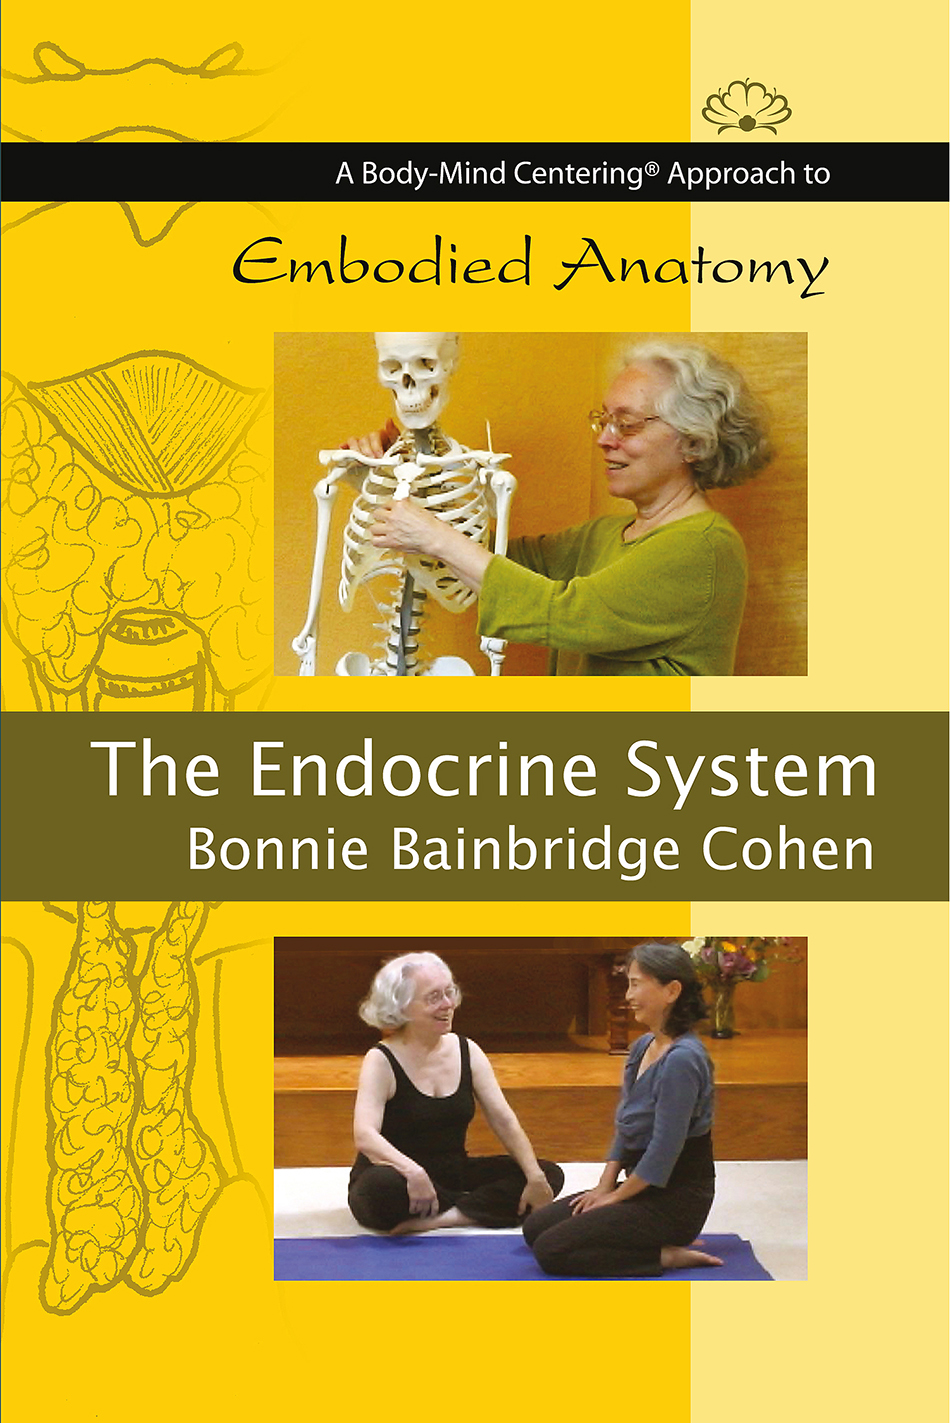 The Endocrine System - Body-Mind Centering®